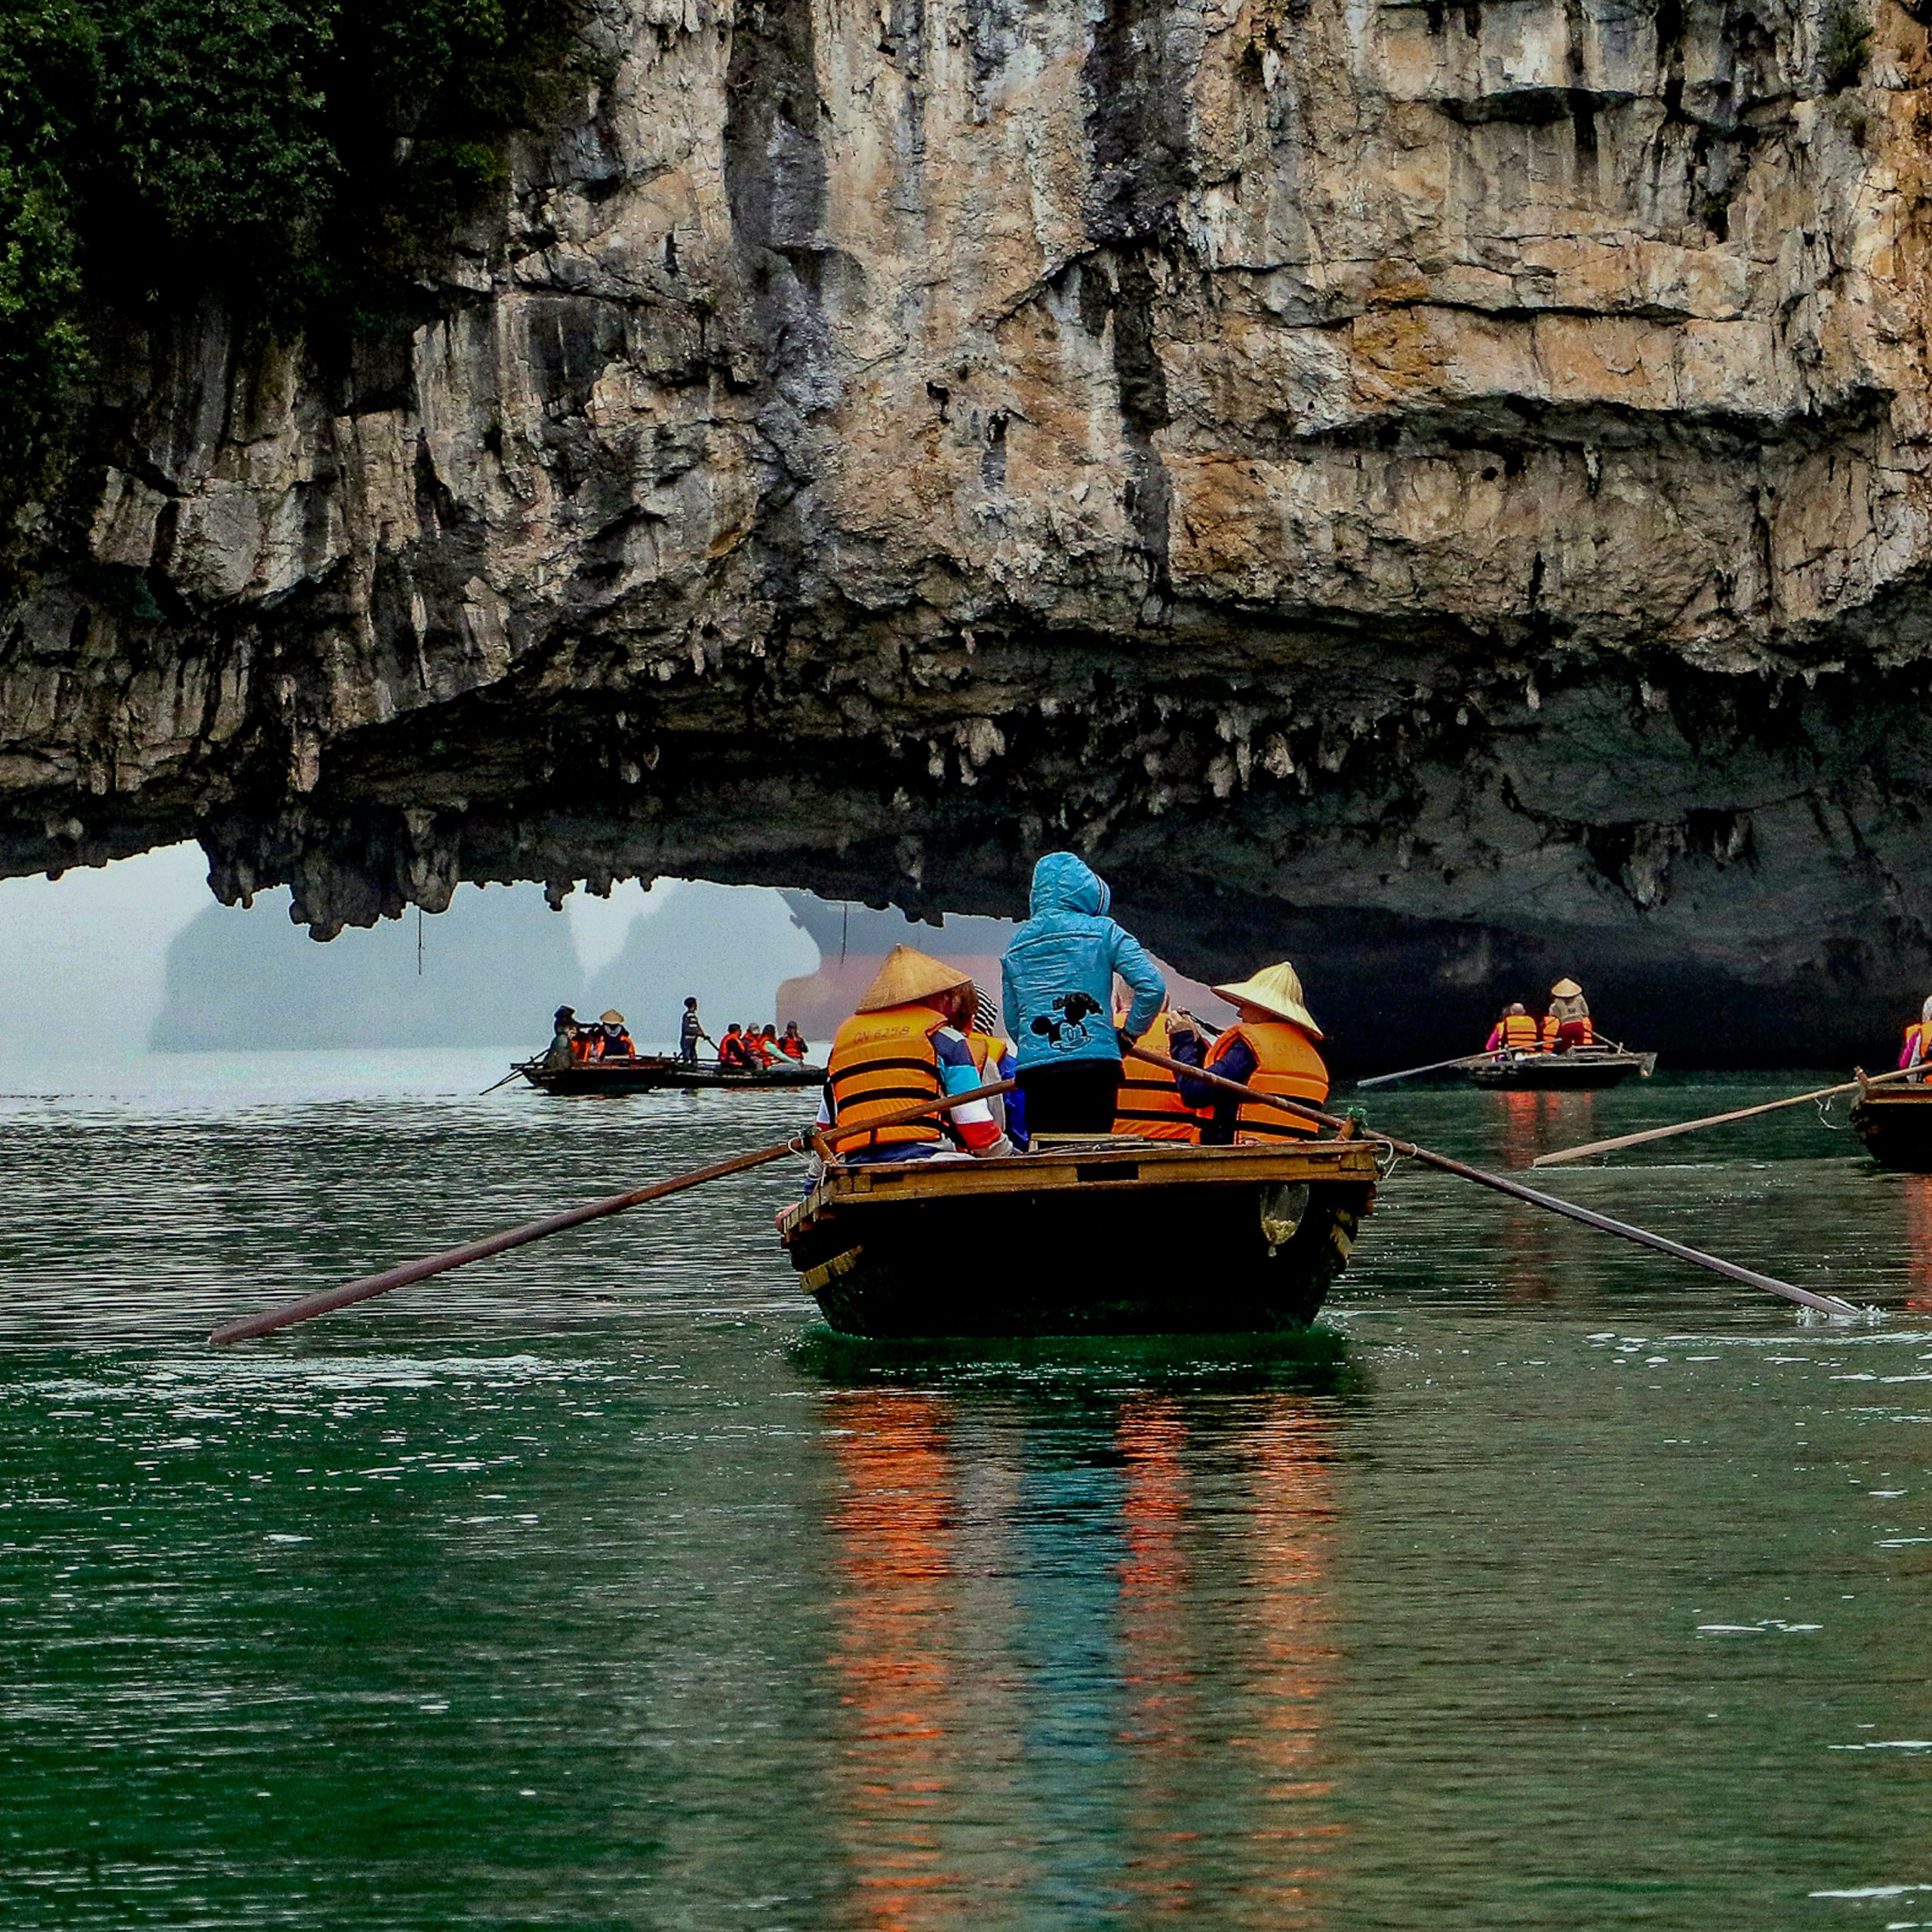 Explore the Best of Northern Vietnam in a 5-Day Journey.